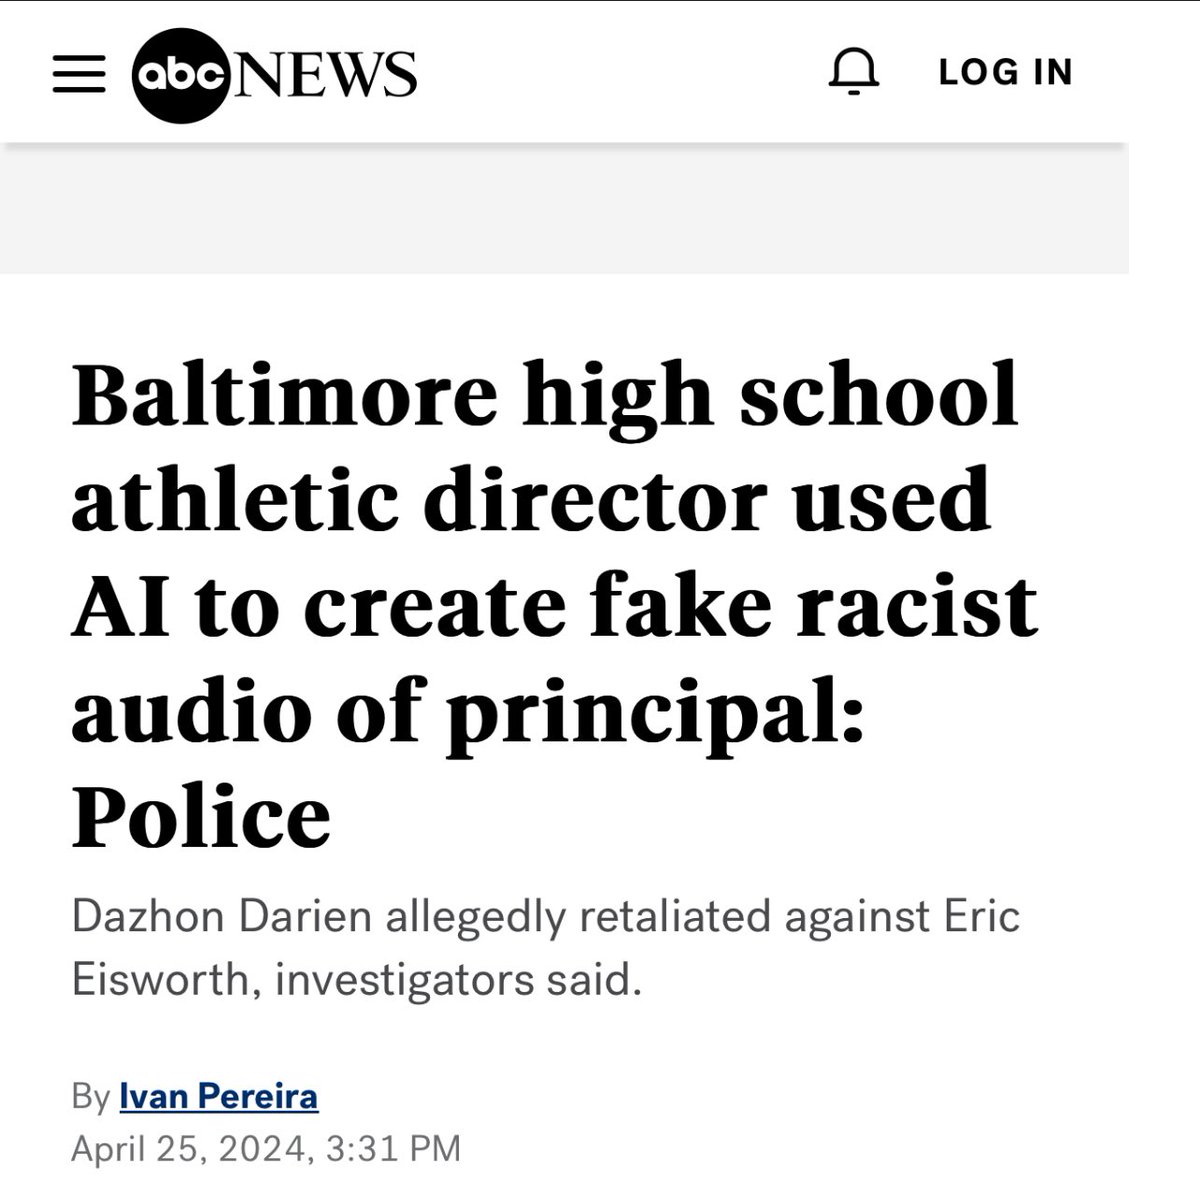 Deepfake audio isn’t just for rap beefs.

A high school principal temporarily lost his job after audio circulated on social media of him making racist comments. It turned out to have been AI generated audio created by a disgruntled staff member.

We now live in the future. 😕